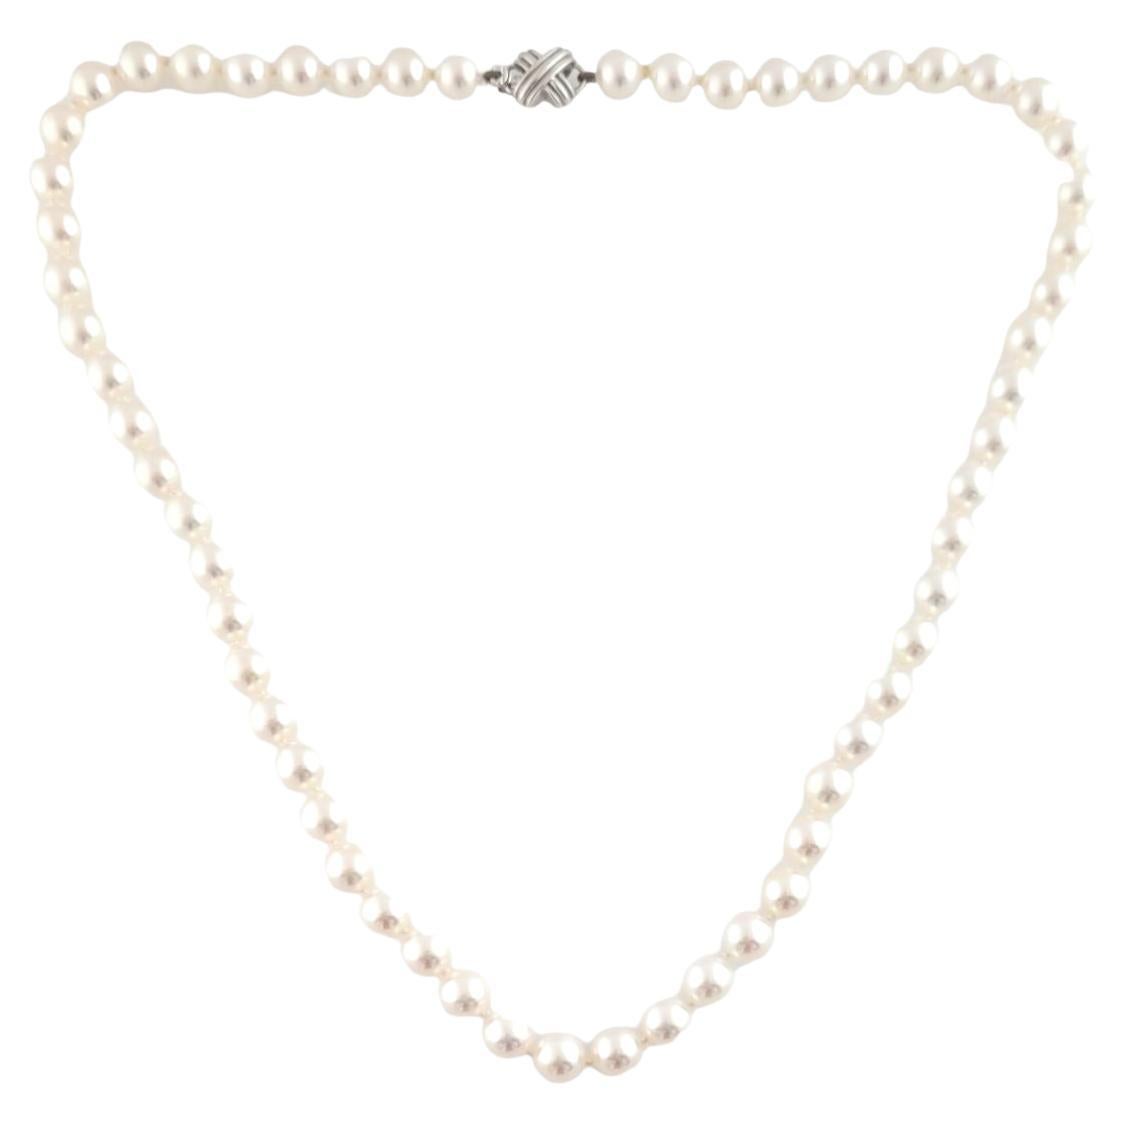 Tiffany & Co. 18K White Gold Pearl Necklace 18.5" #14735